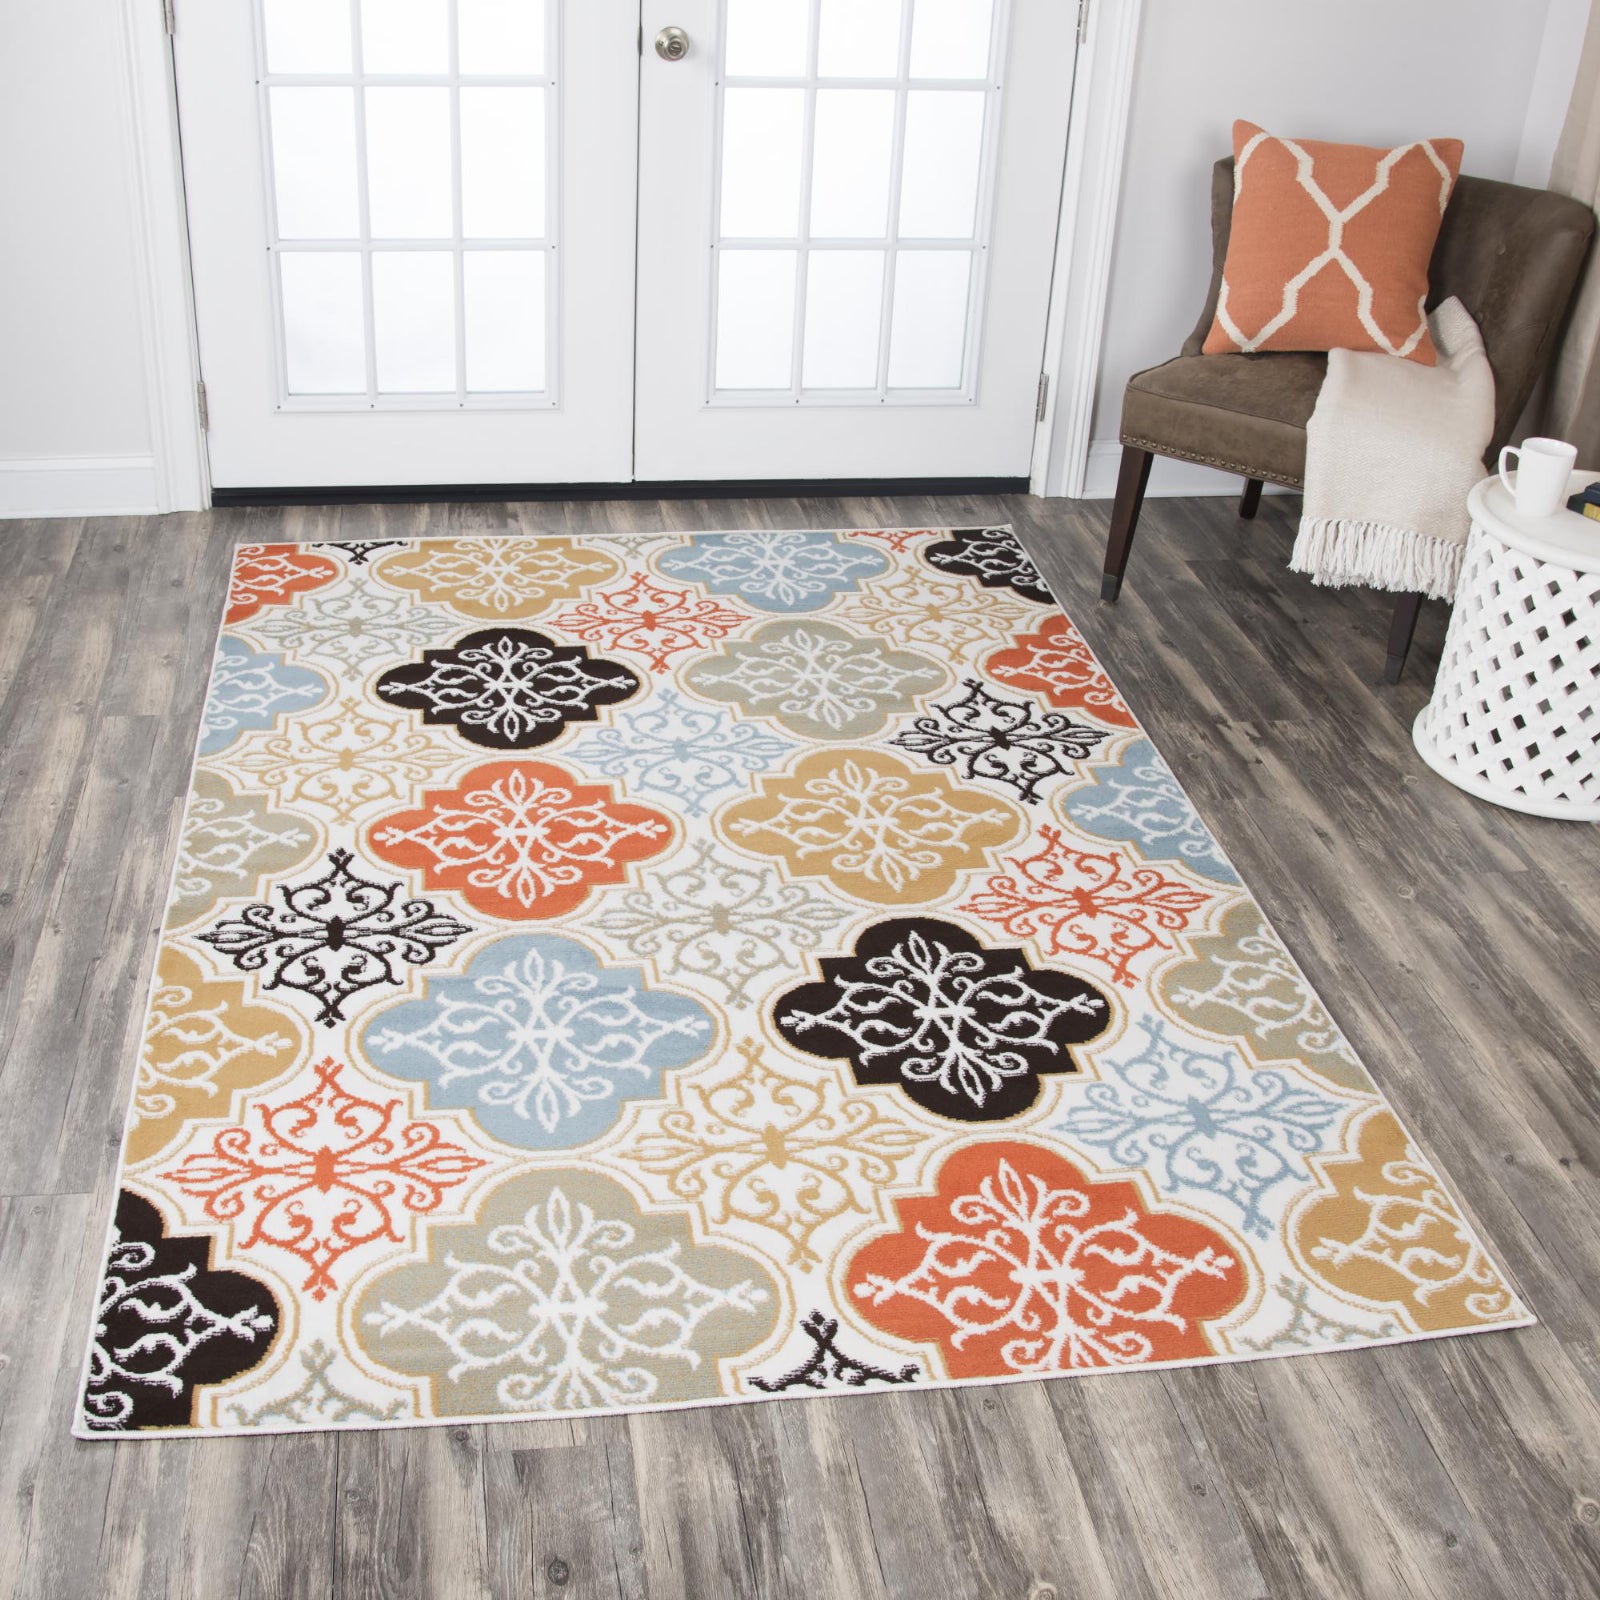 Rizzy Xpression XP6888 Ivory Area Rug Corner Image